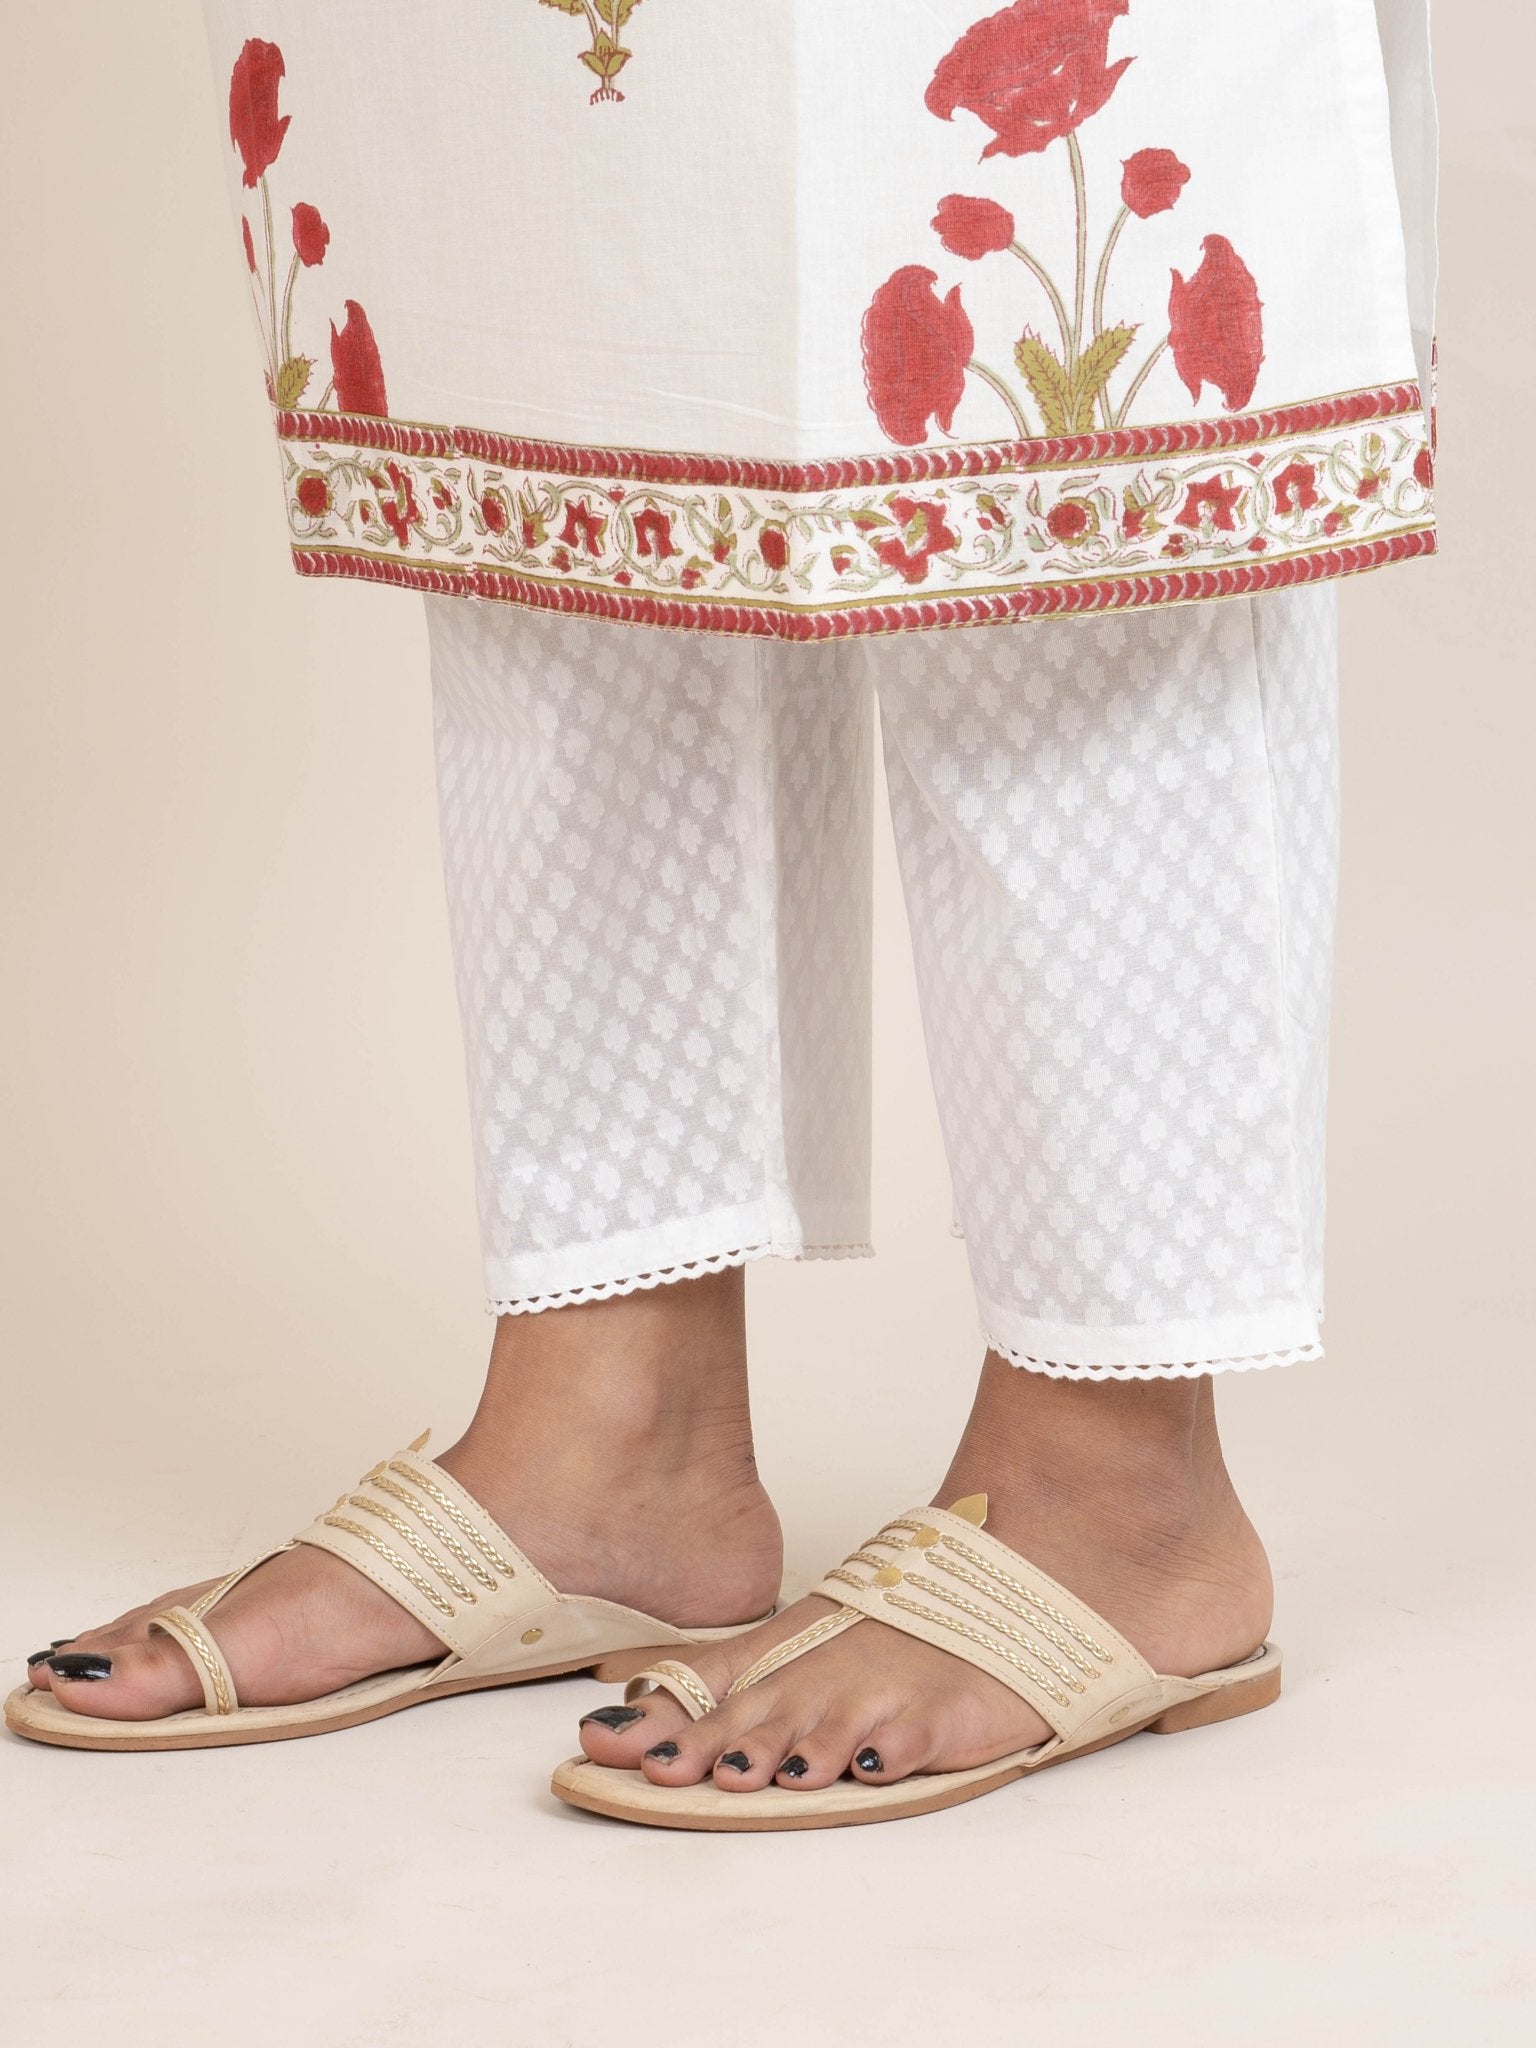 Poncha design trousers Poncha... - LAAJWA's Collection BY HJ | Facebook